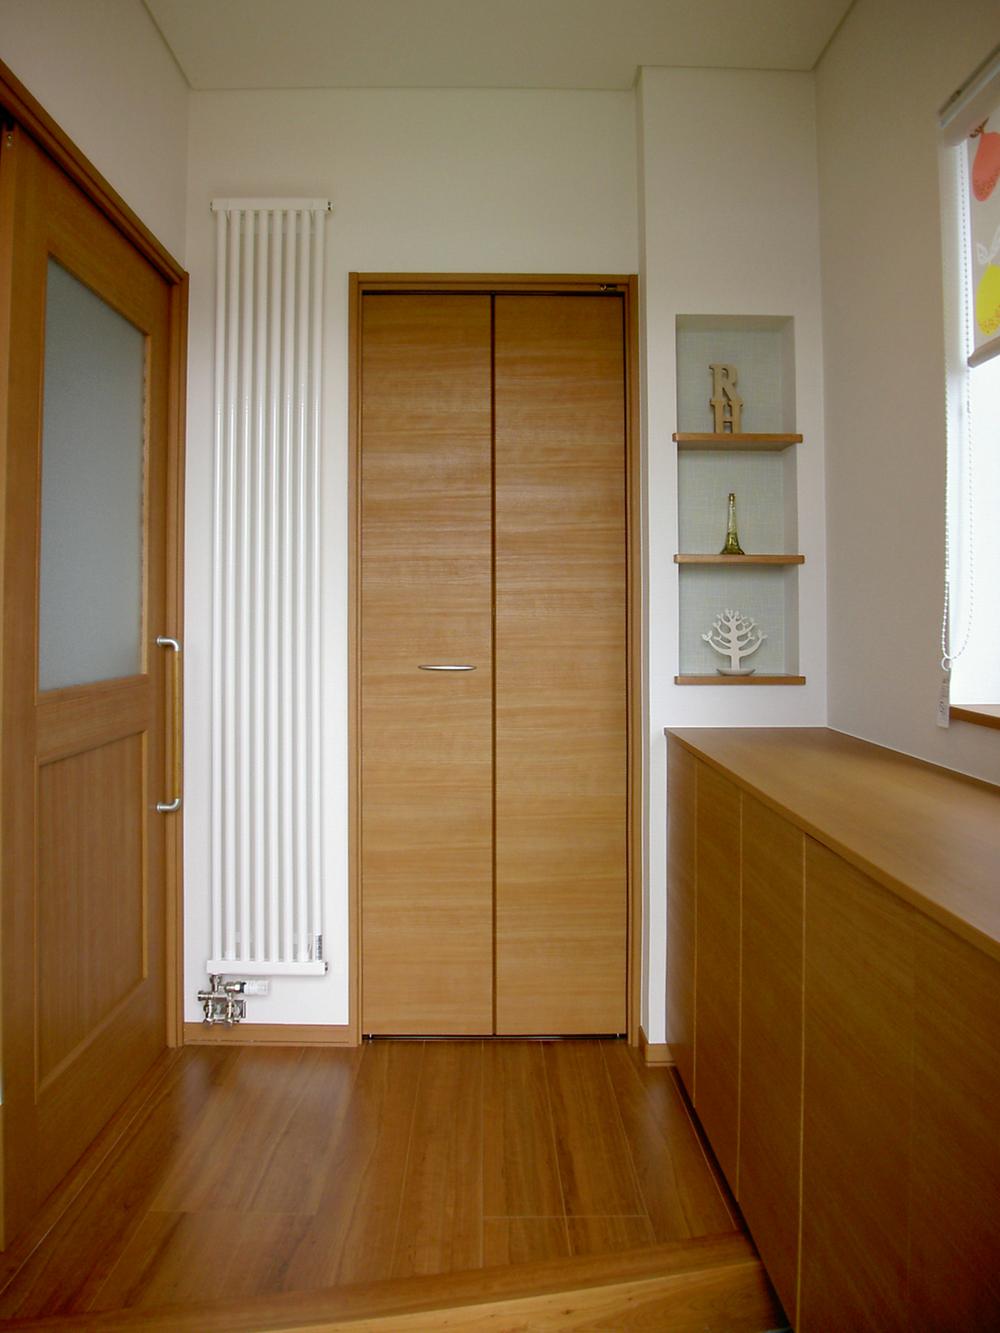 Entrance. Wide entrance storage and, Entrance having a functional closet can hold clothes